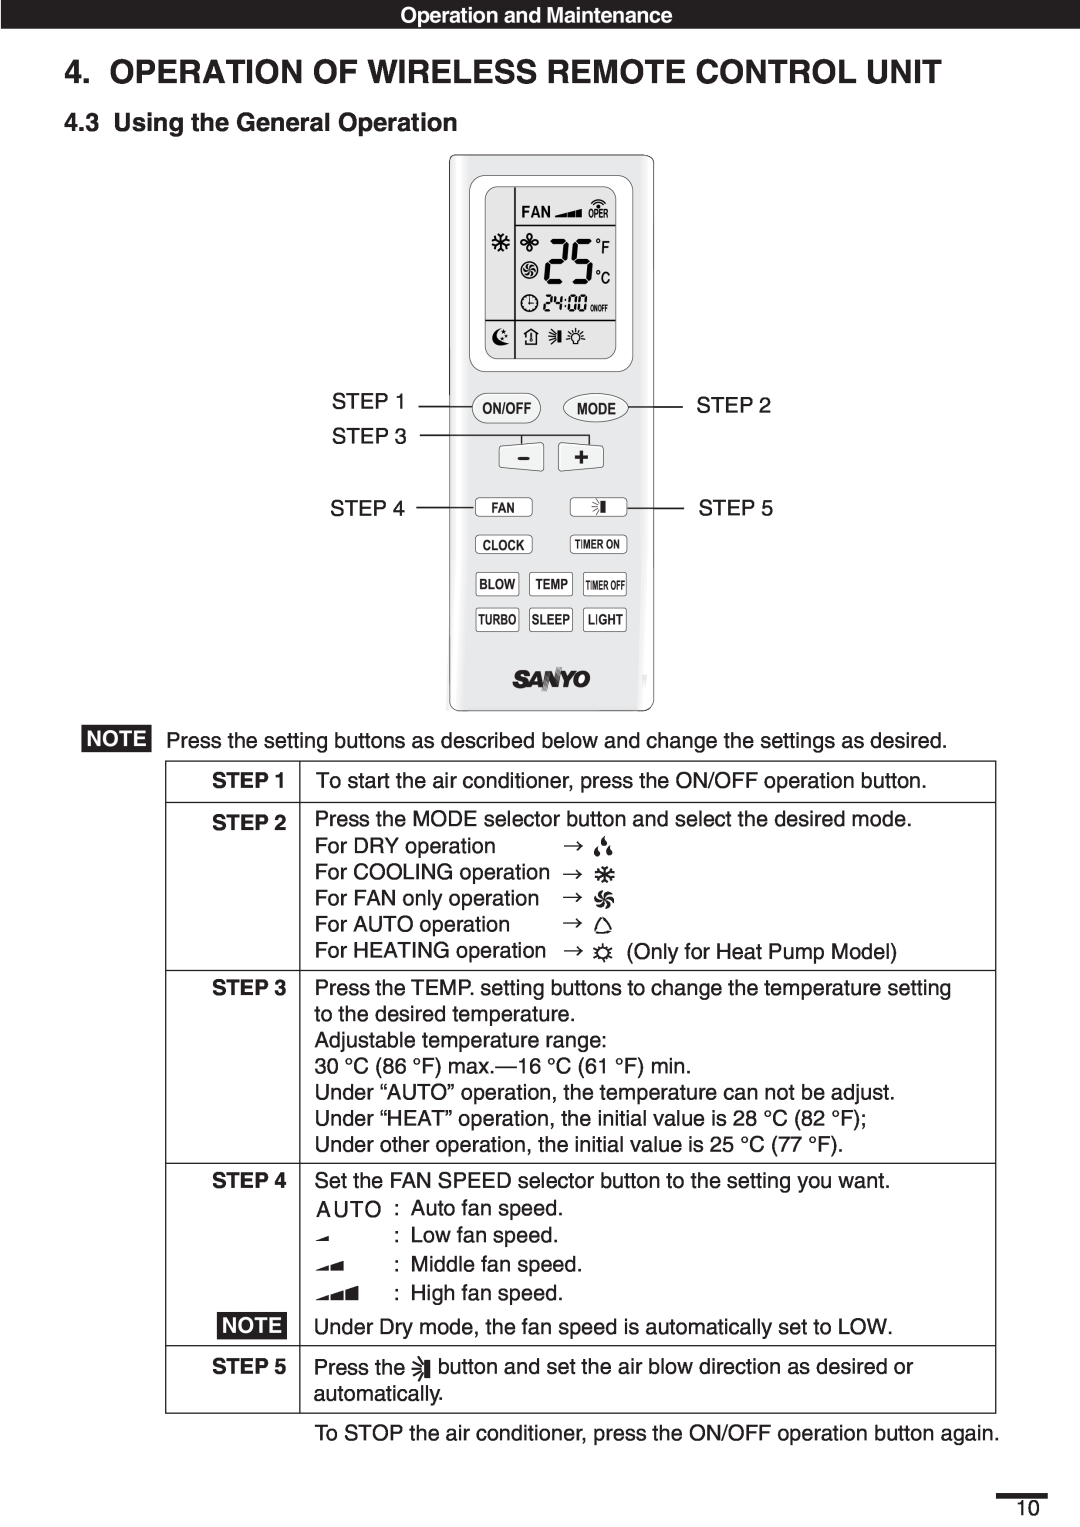 Haier SAP-K18AM 4.3Using the General Operation, Operation Of Wireless Remote Control Unit, Operation and Maintenance 